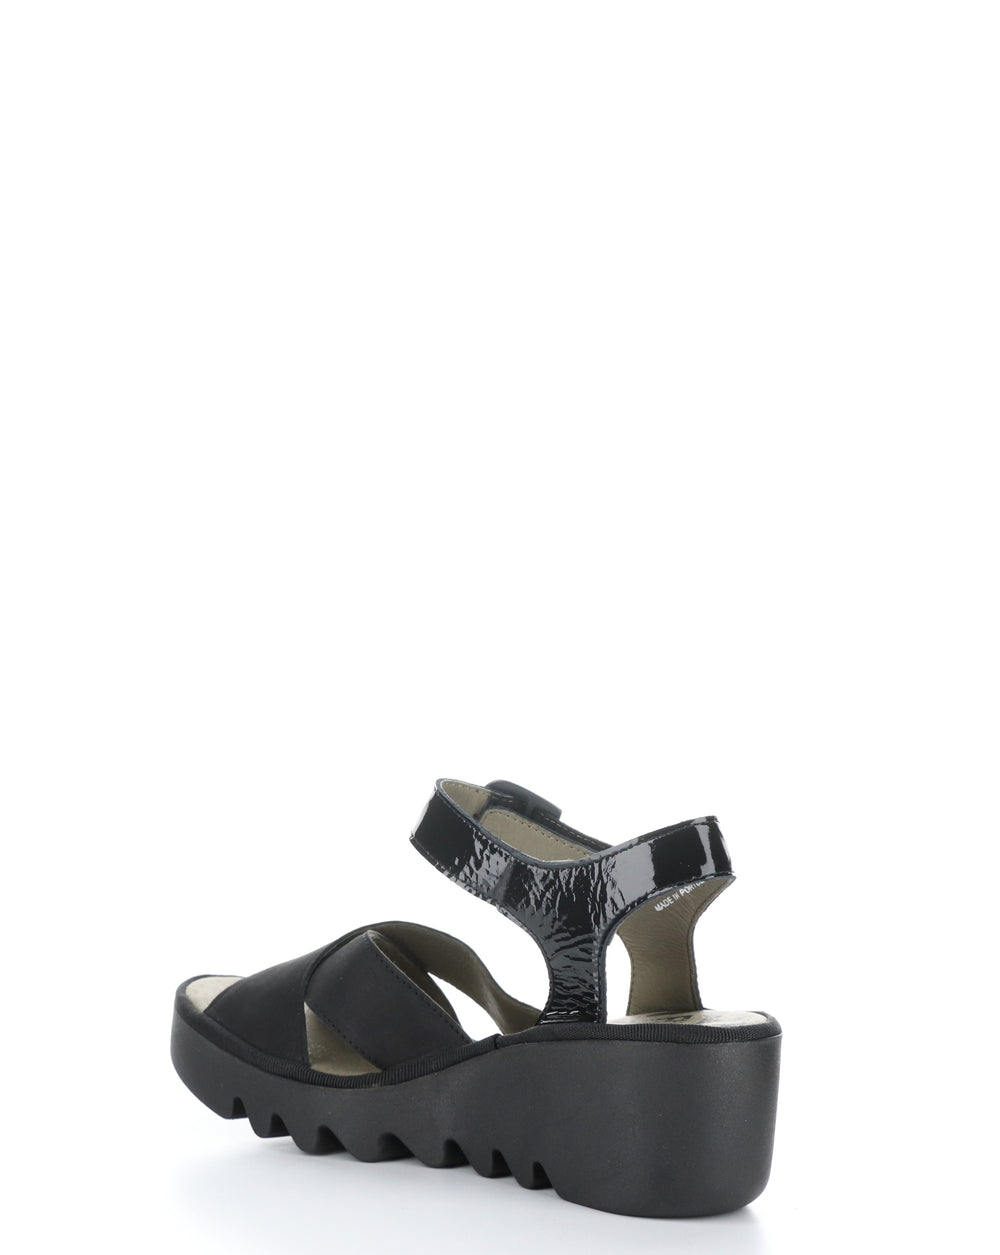 BACE411FLY 000 BLACK Round toe Sandals